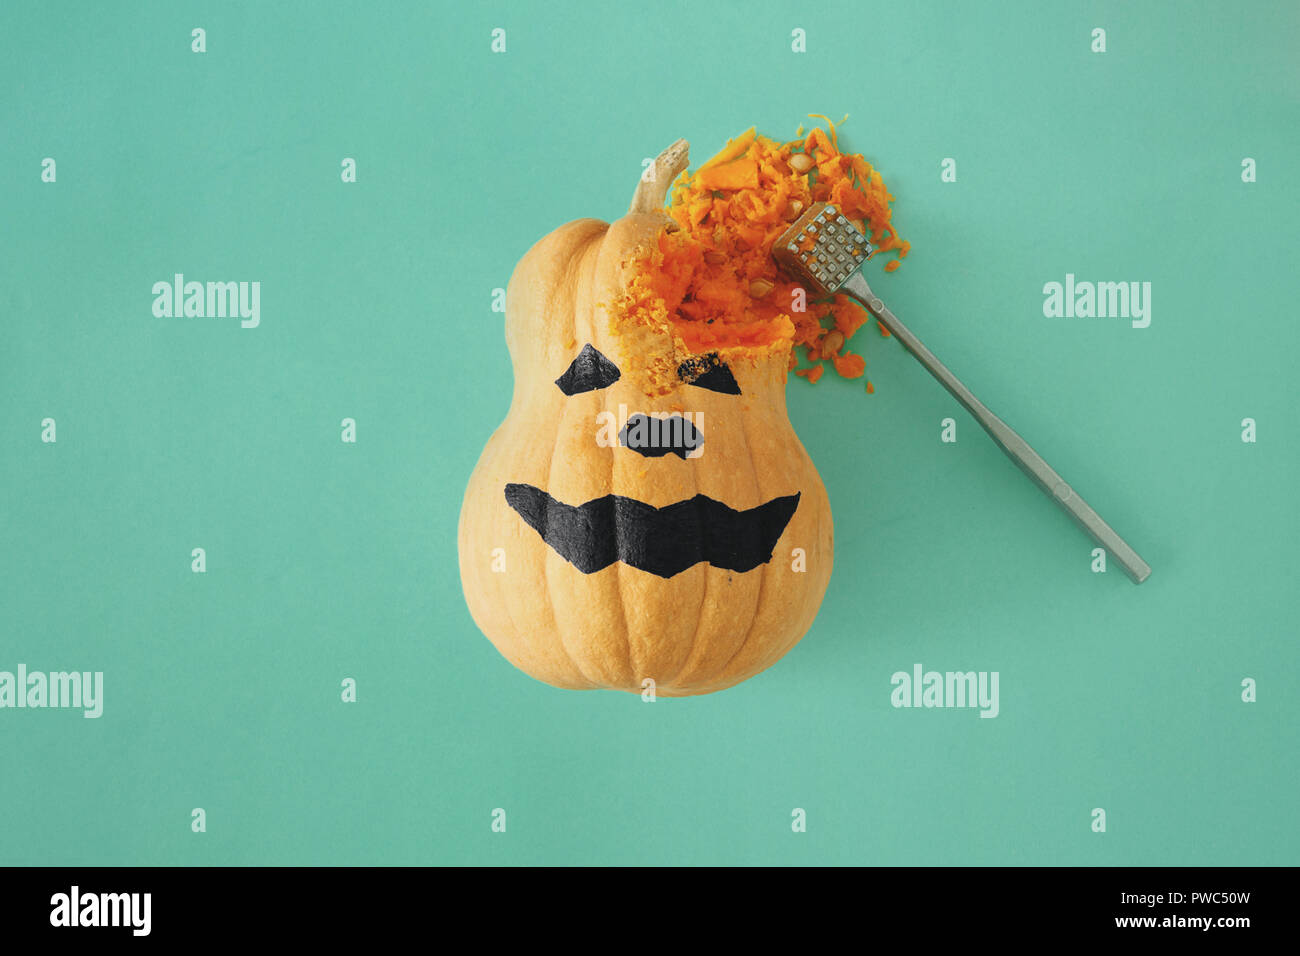 Flat lay funny scary face Halloween pumpkins on turquoise background. Fall autumn halloween minimal concept top view Stock Photo